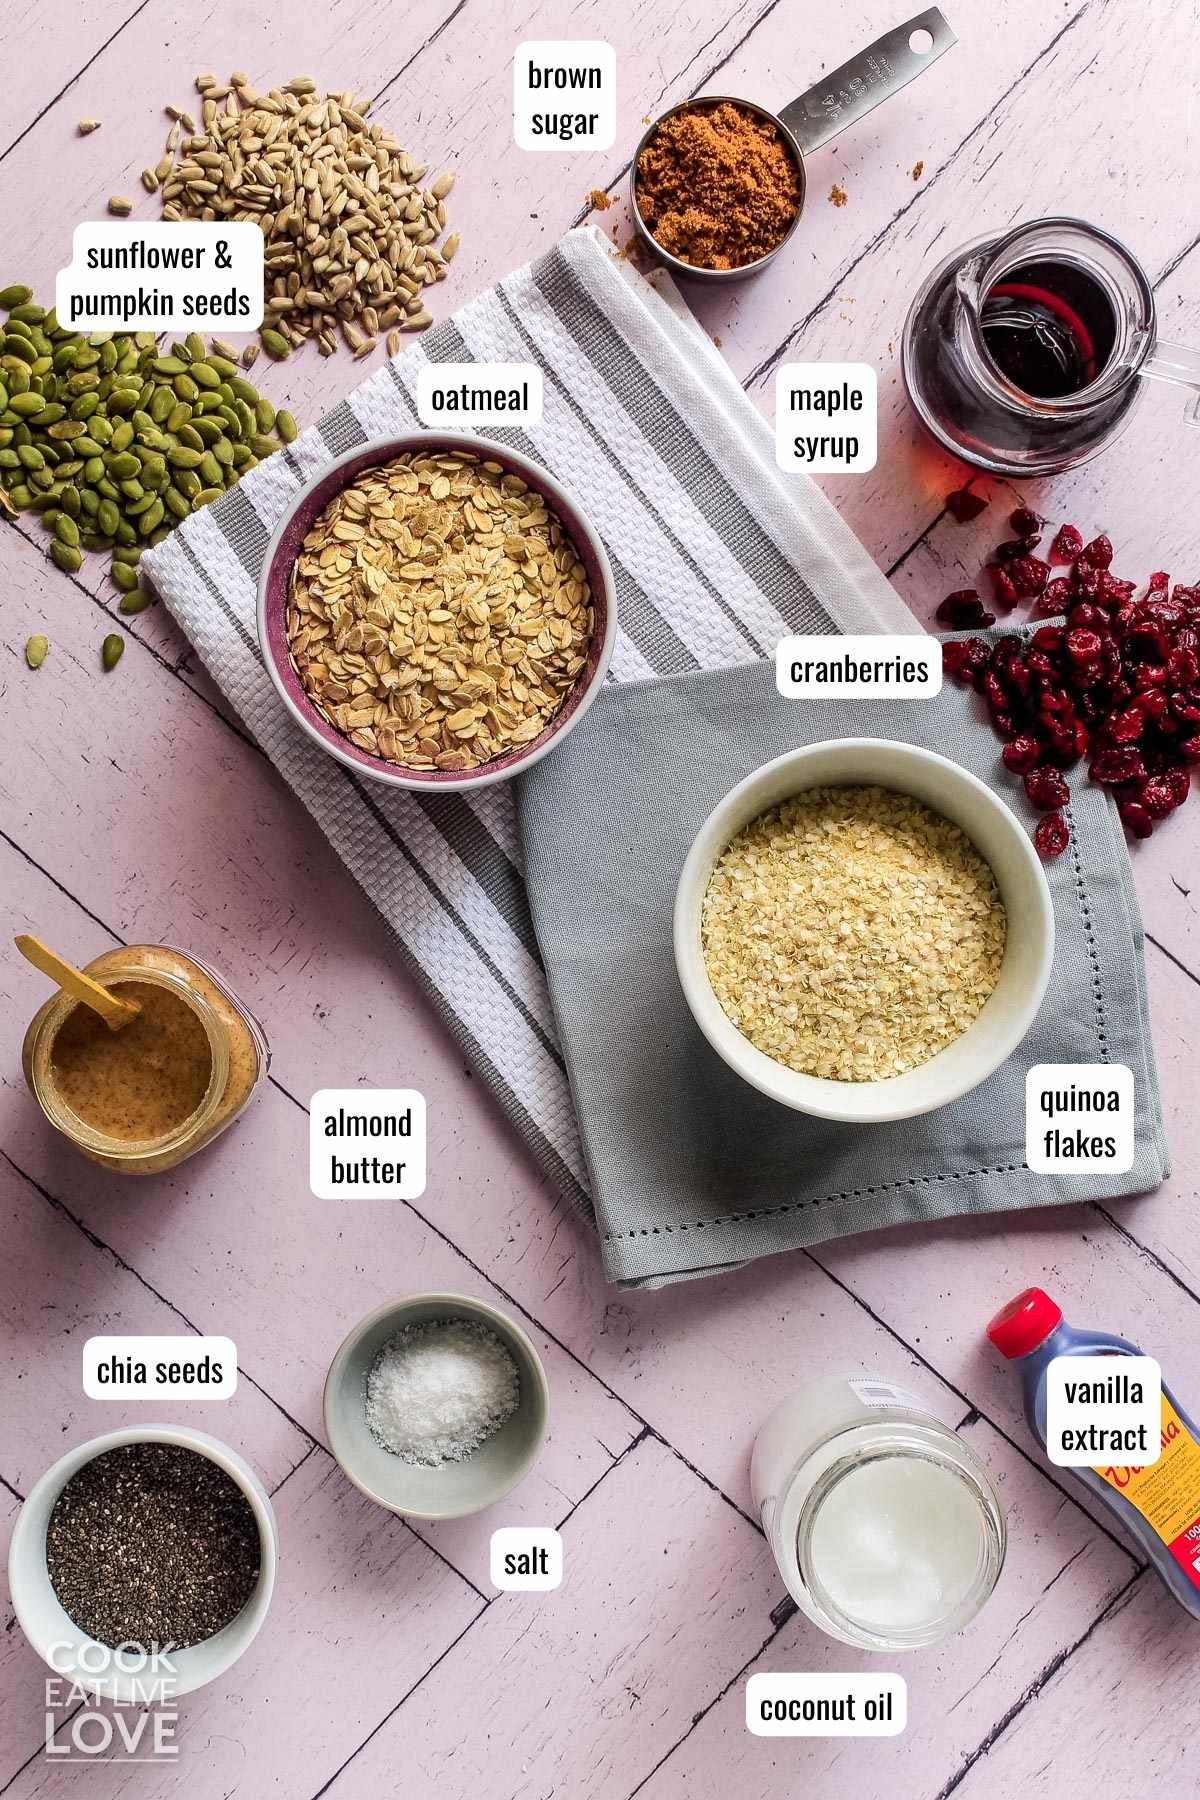 Overhead view of ingredients to make vegan breakfast bars on pink backdrop with text labels for each.